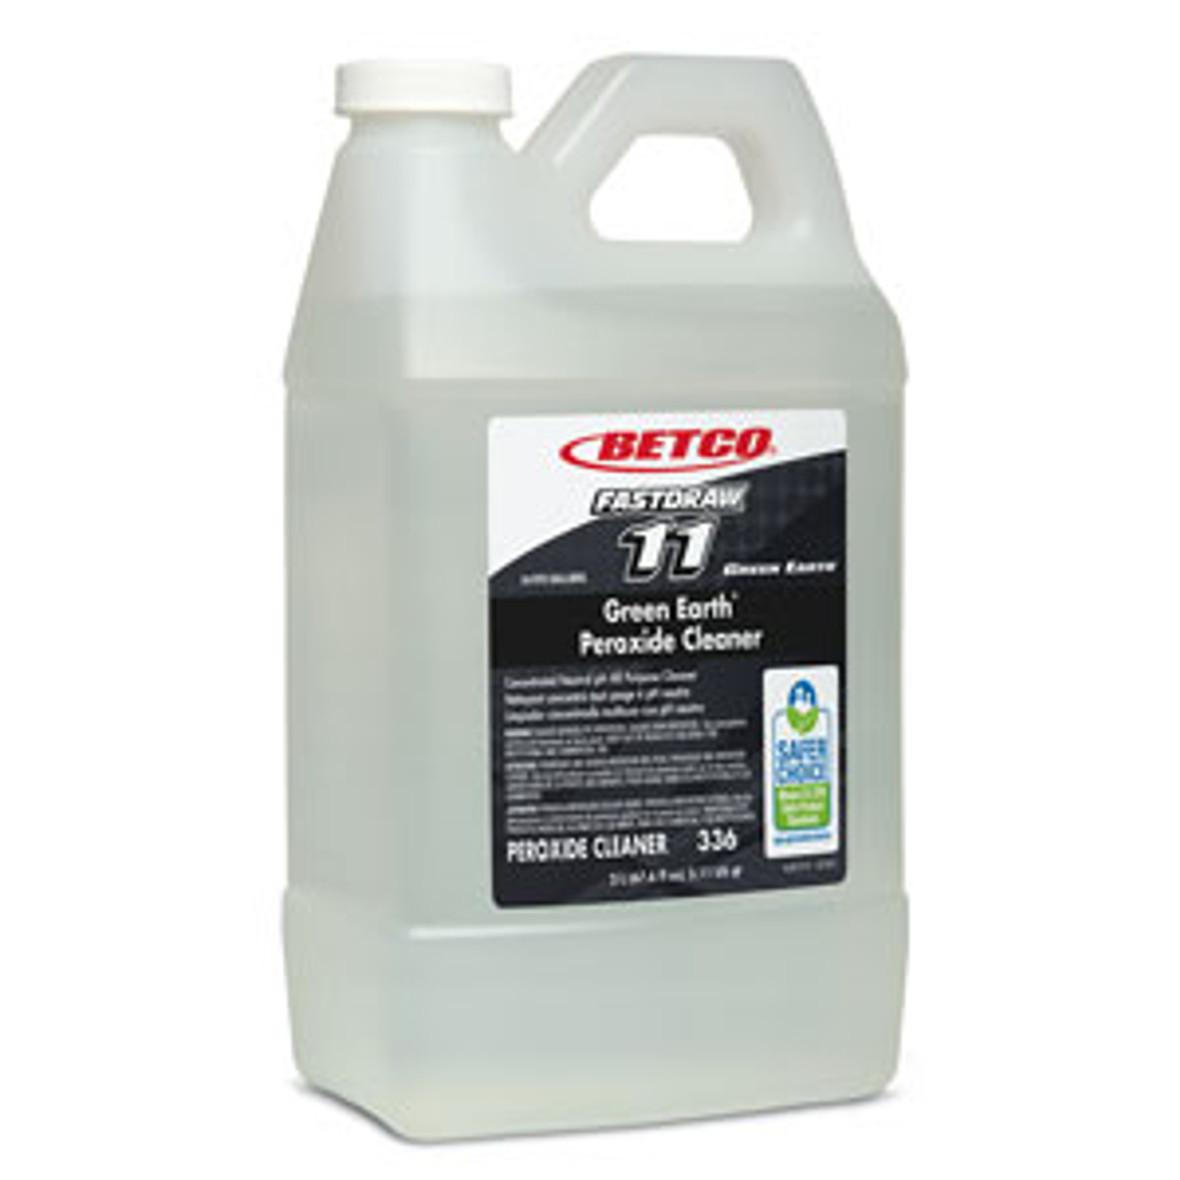 Betco Green Earth Peroxide Cleaner Fresh Mint Scent, 2 Liters, 2 Per Case